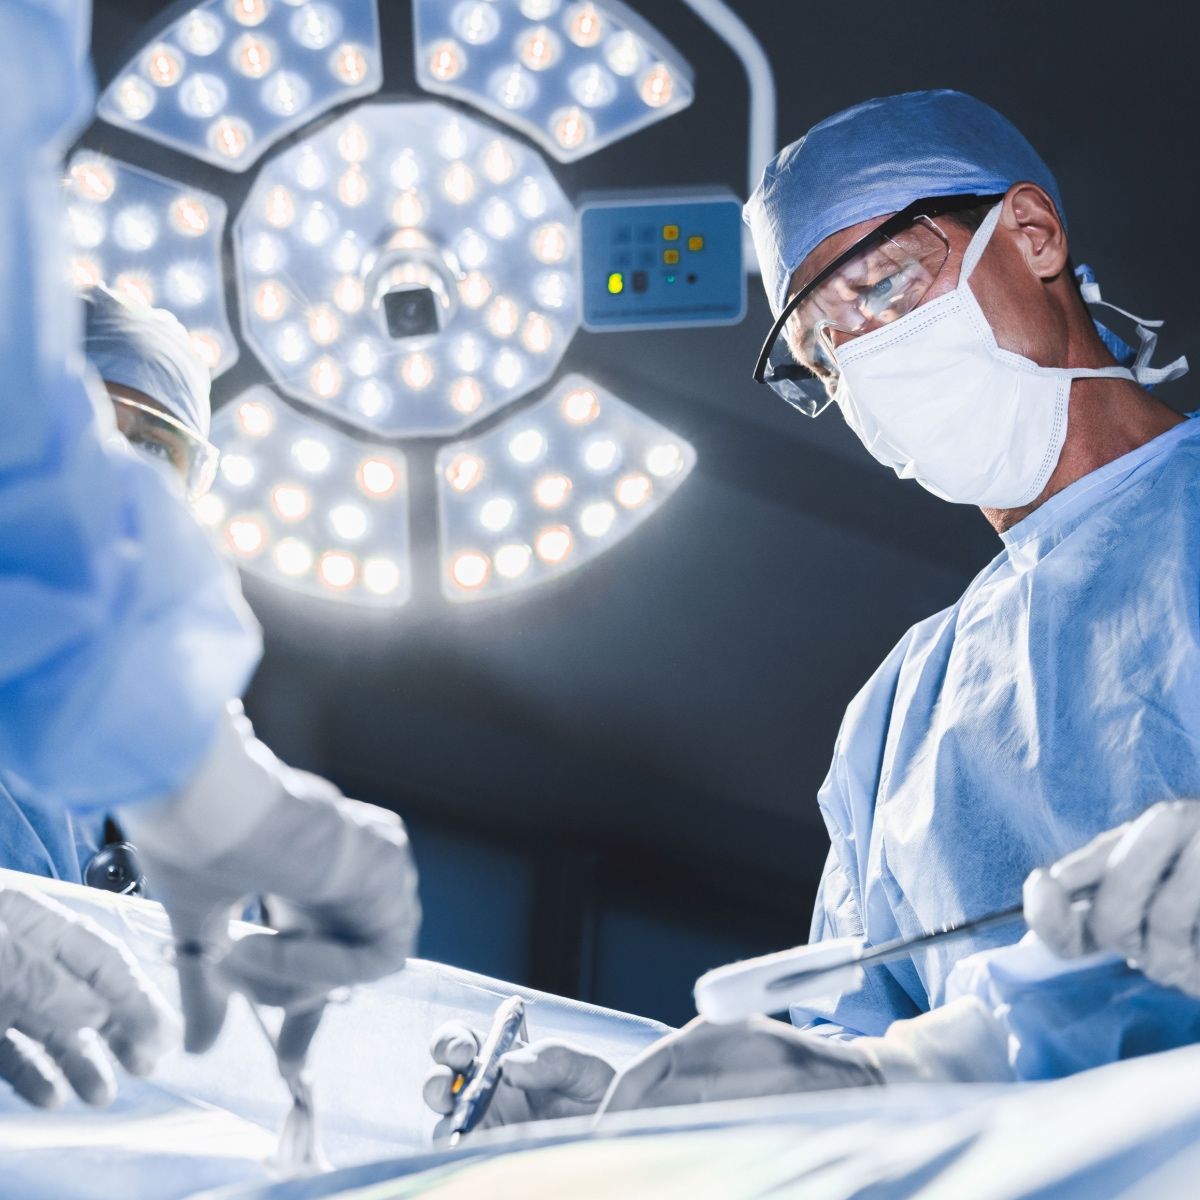 Benefits of surgical hardware in wound care applications